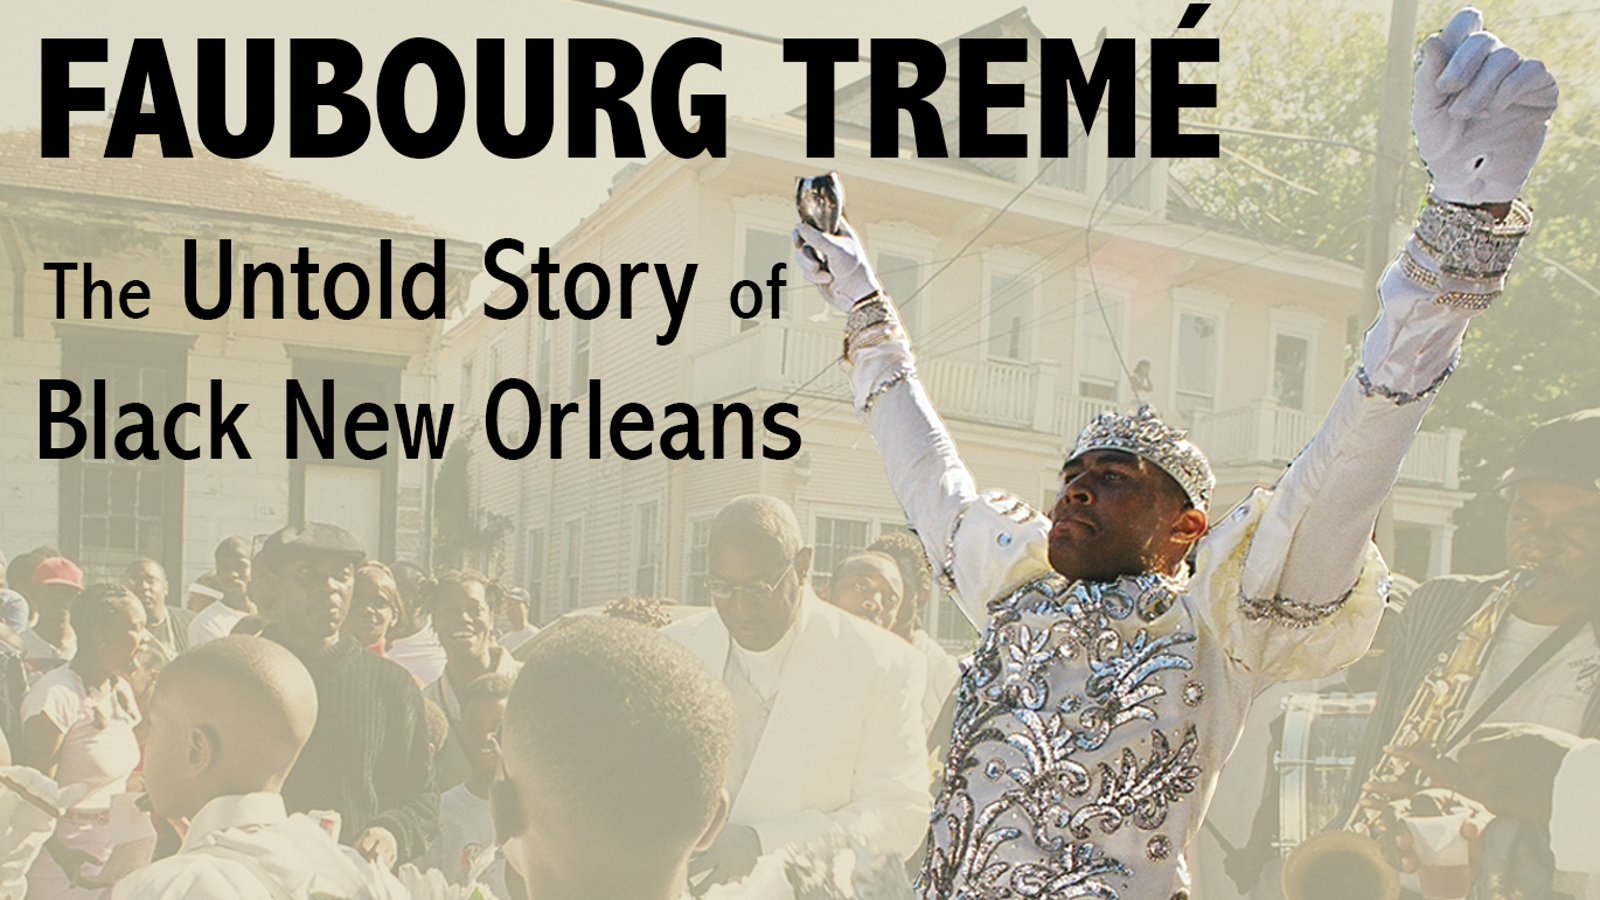 Faubourg Treme - The Untold Story of Black New Orleans